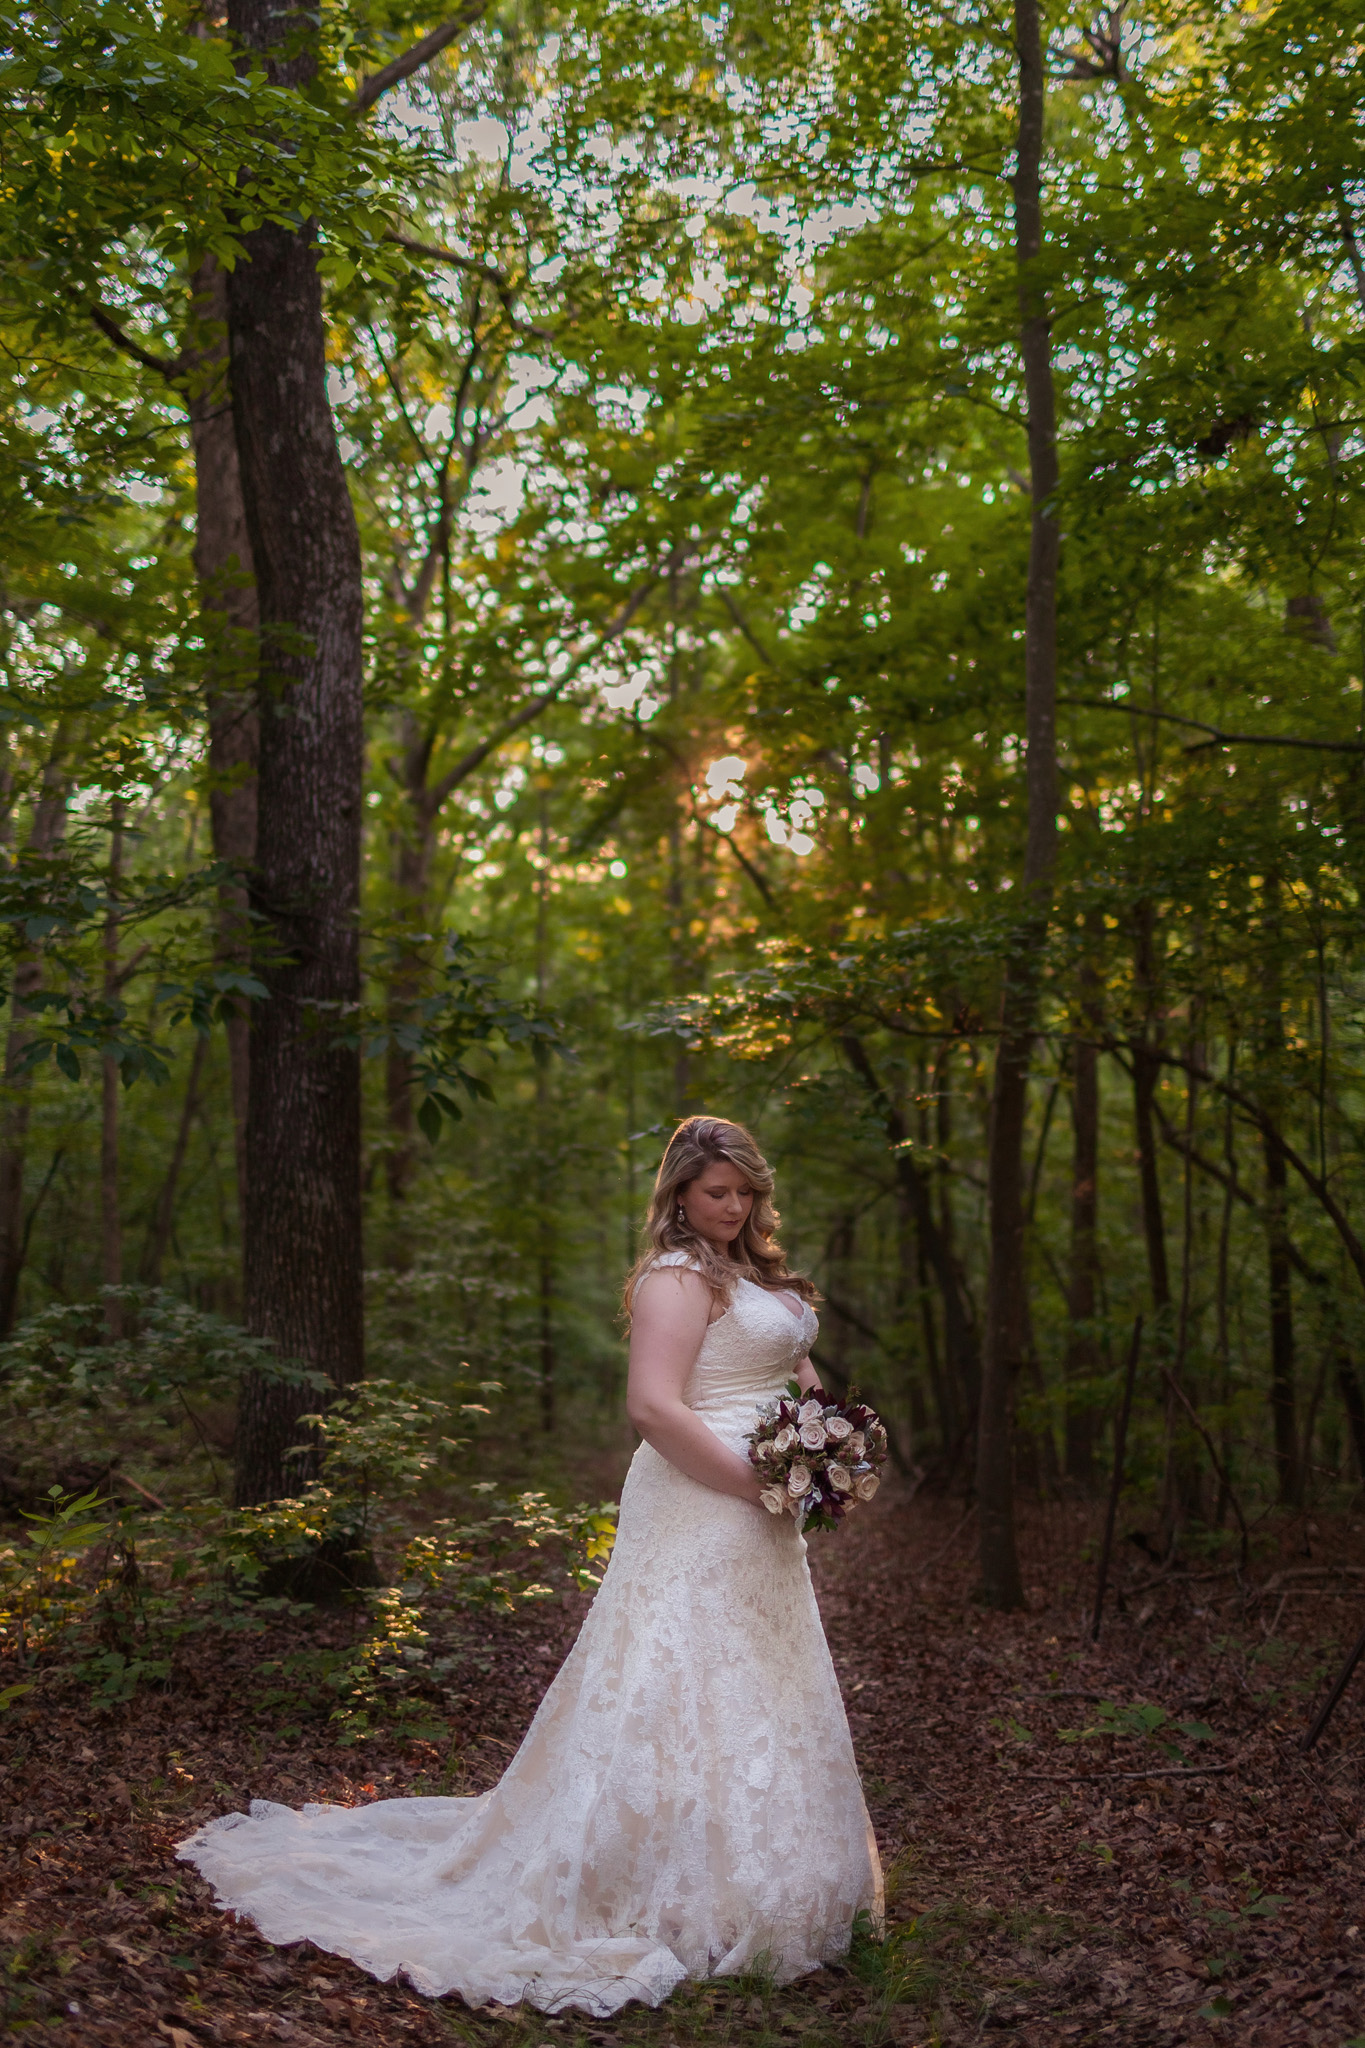 This beautiful bride looks lovlingly at her bouquet desiged by Abba Desigs as the sun filters through the trees during her bridal portrait session. Photo by Mabyn